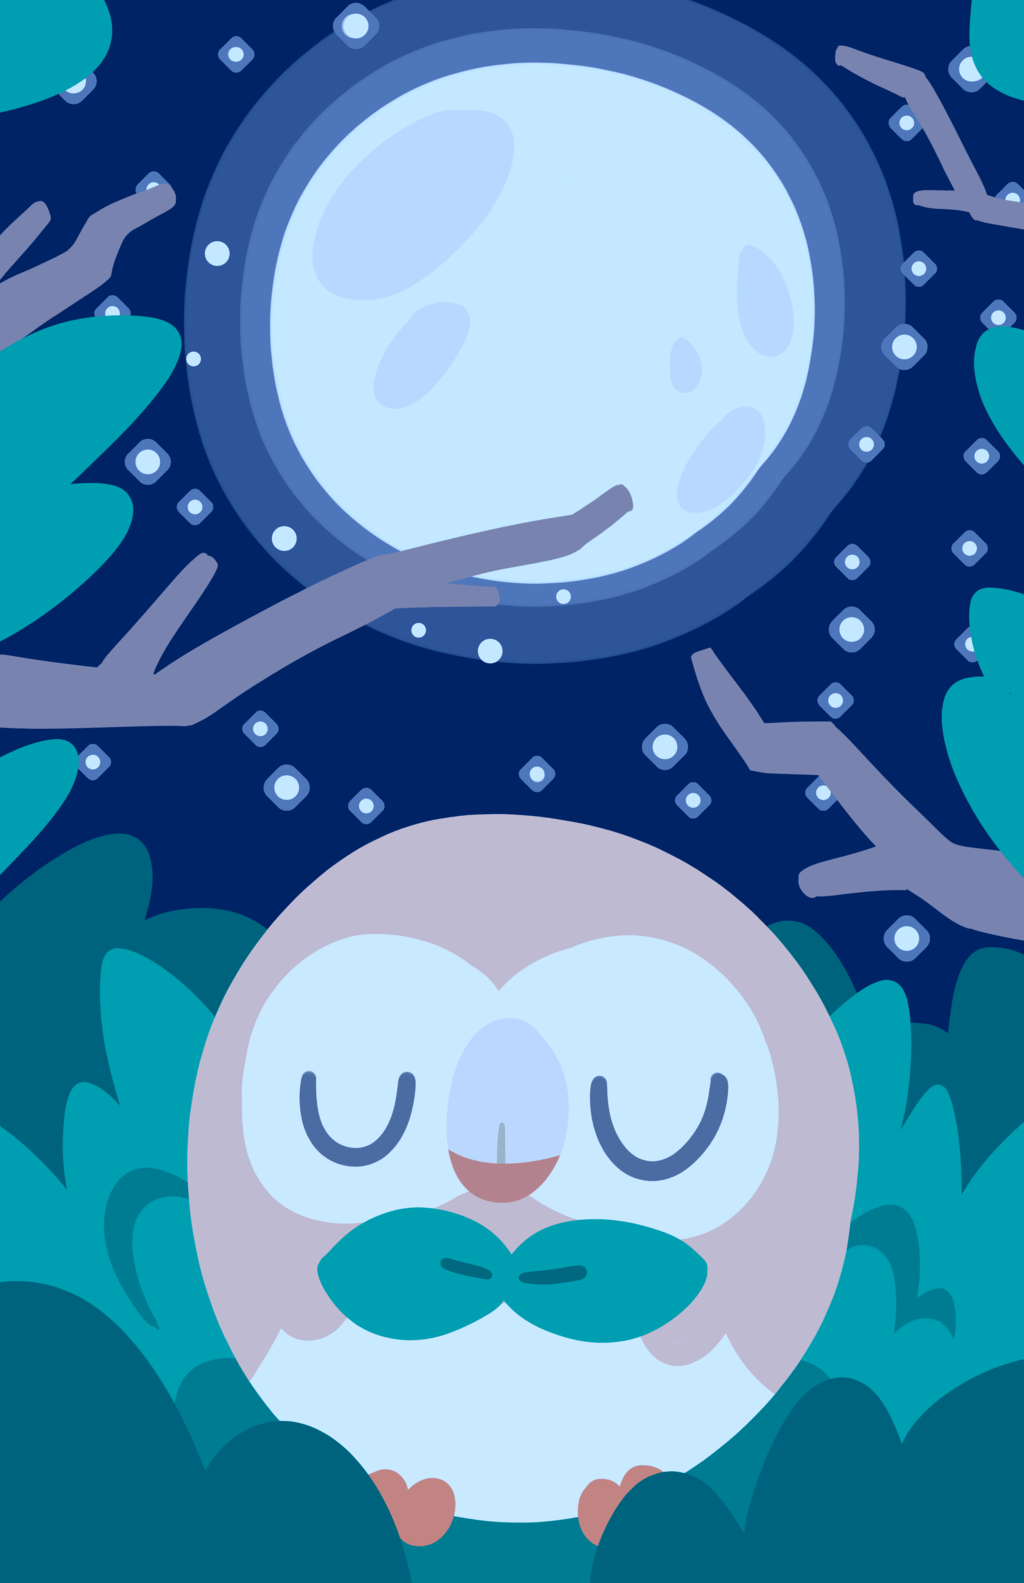 Upvote now! 999 upvotes and rowlet will wake up! #TeamRowlet